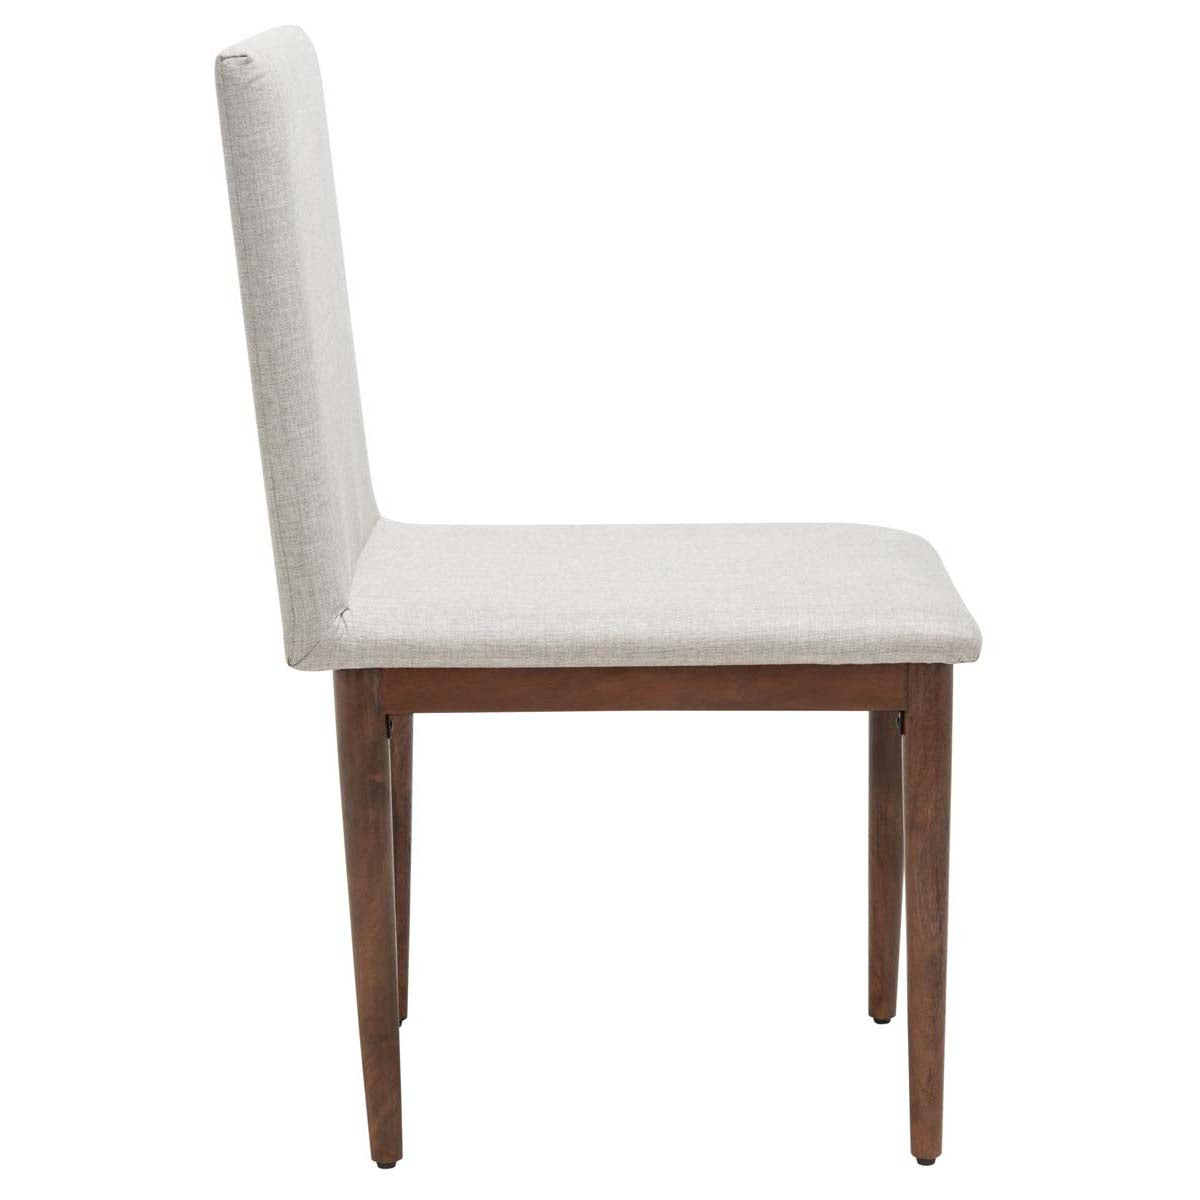 Safavieh Couture Milana Dining Chair (Set of 2)